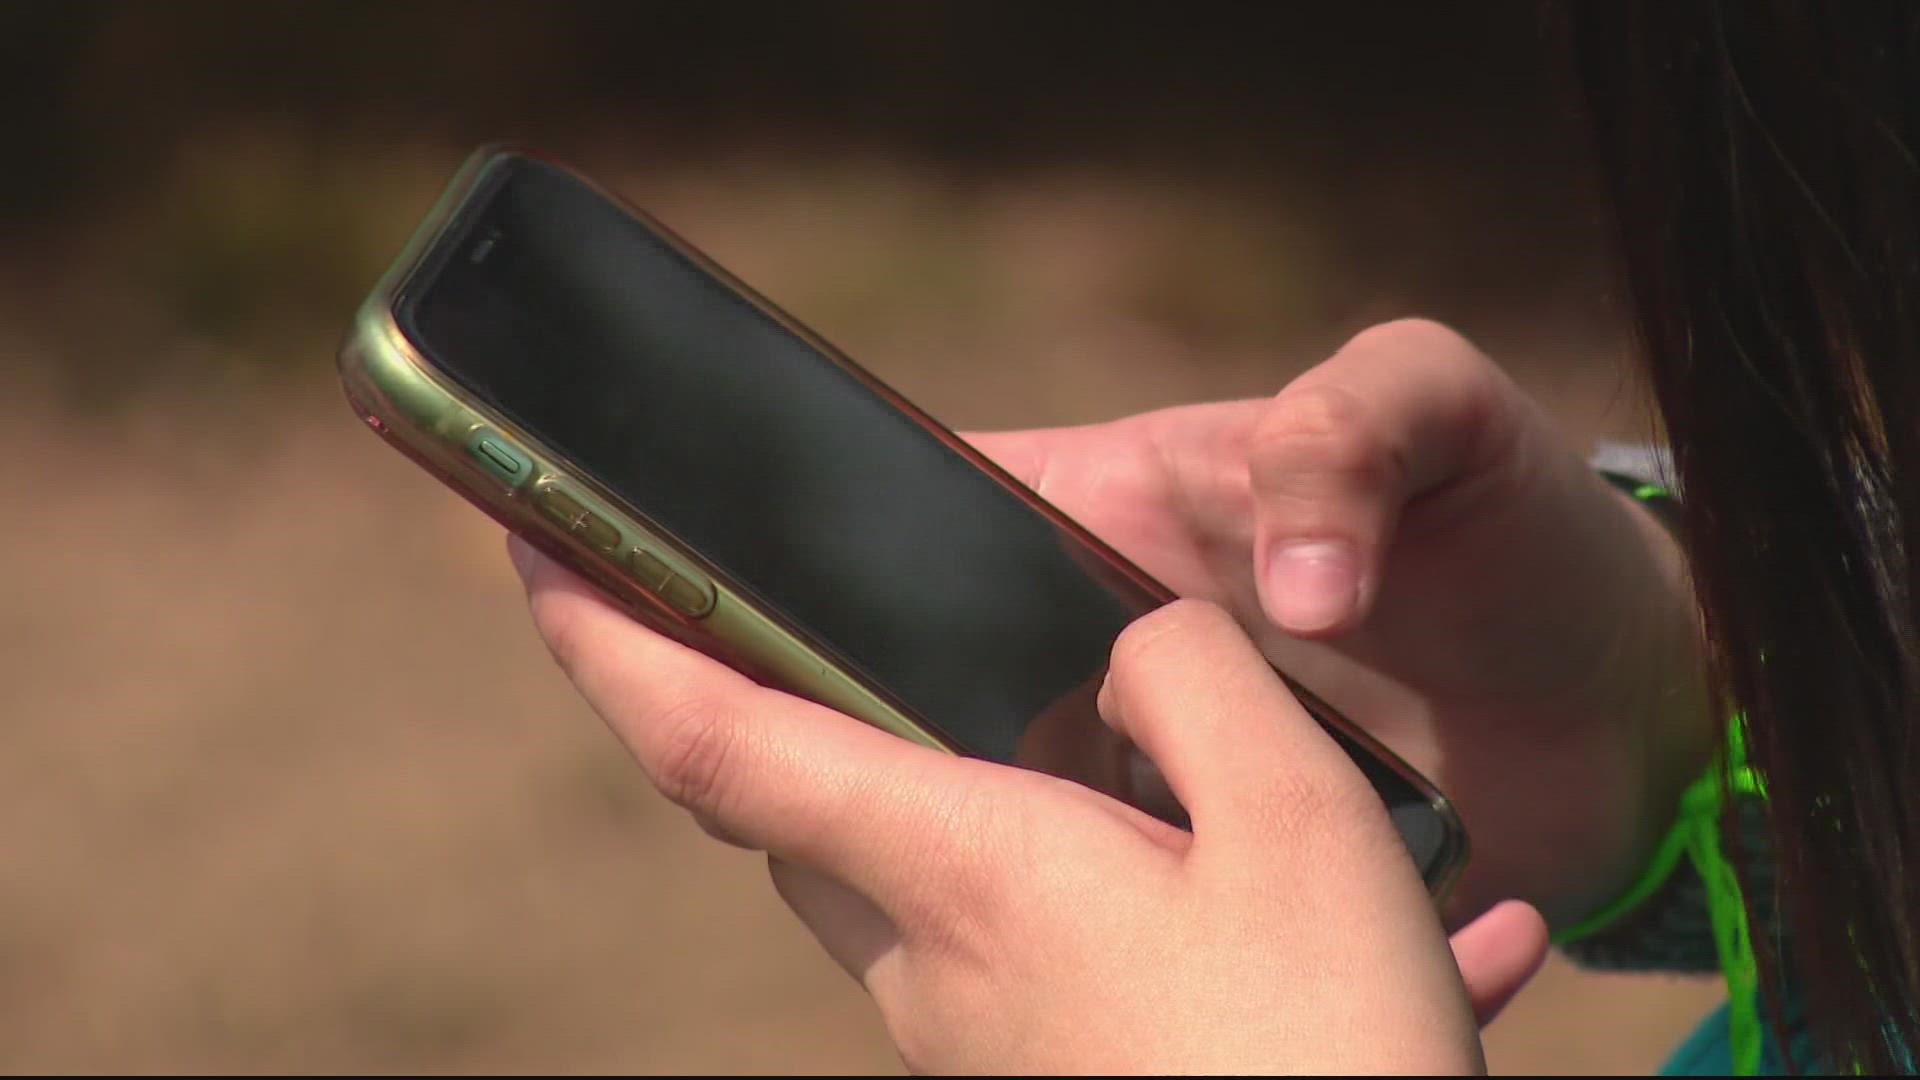 Students at Herndon High School in Fairfax County are no longer allowed to use their cell phones during class.